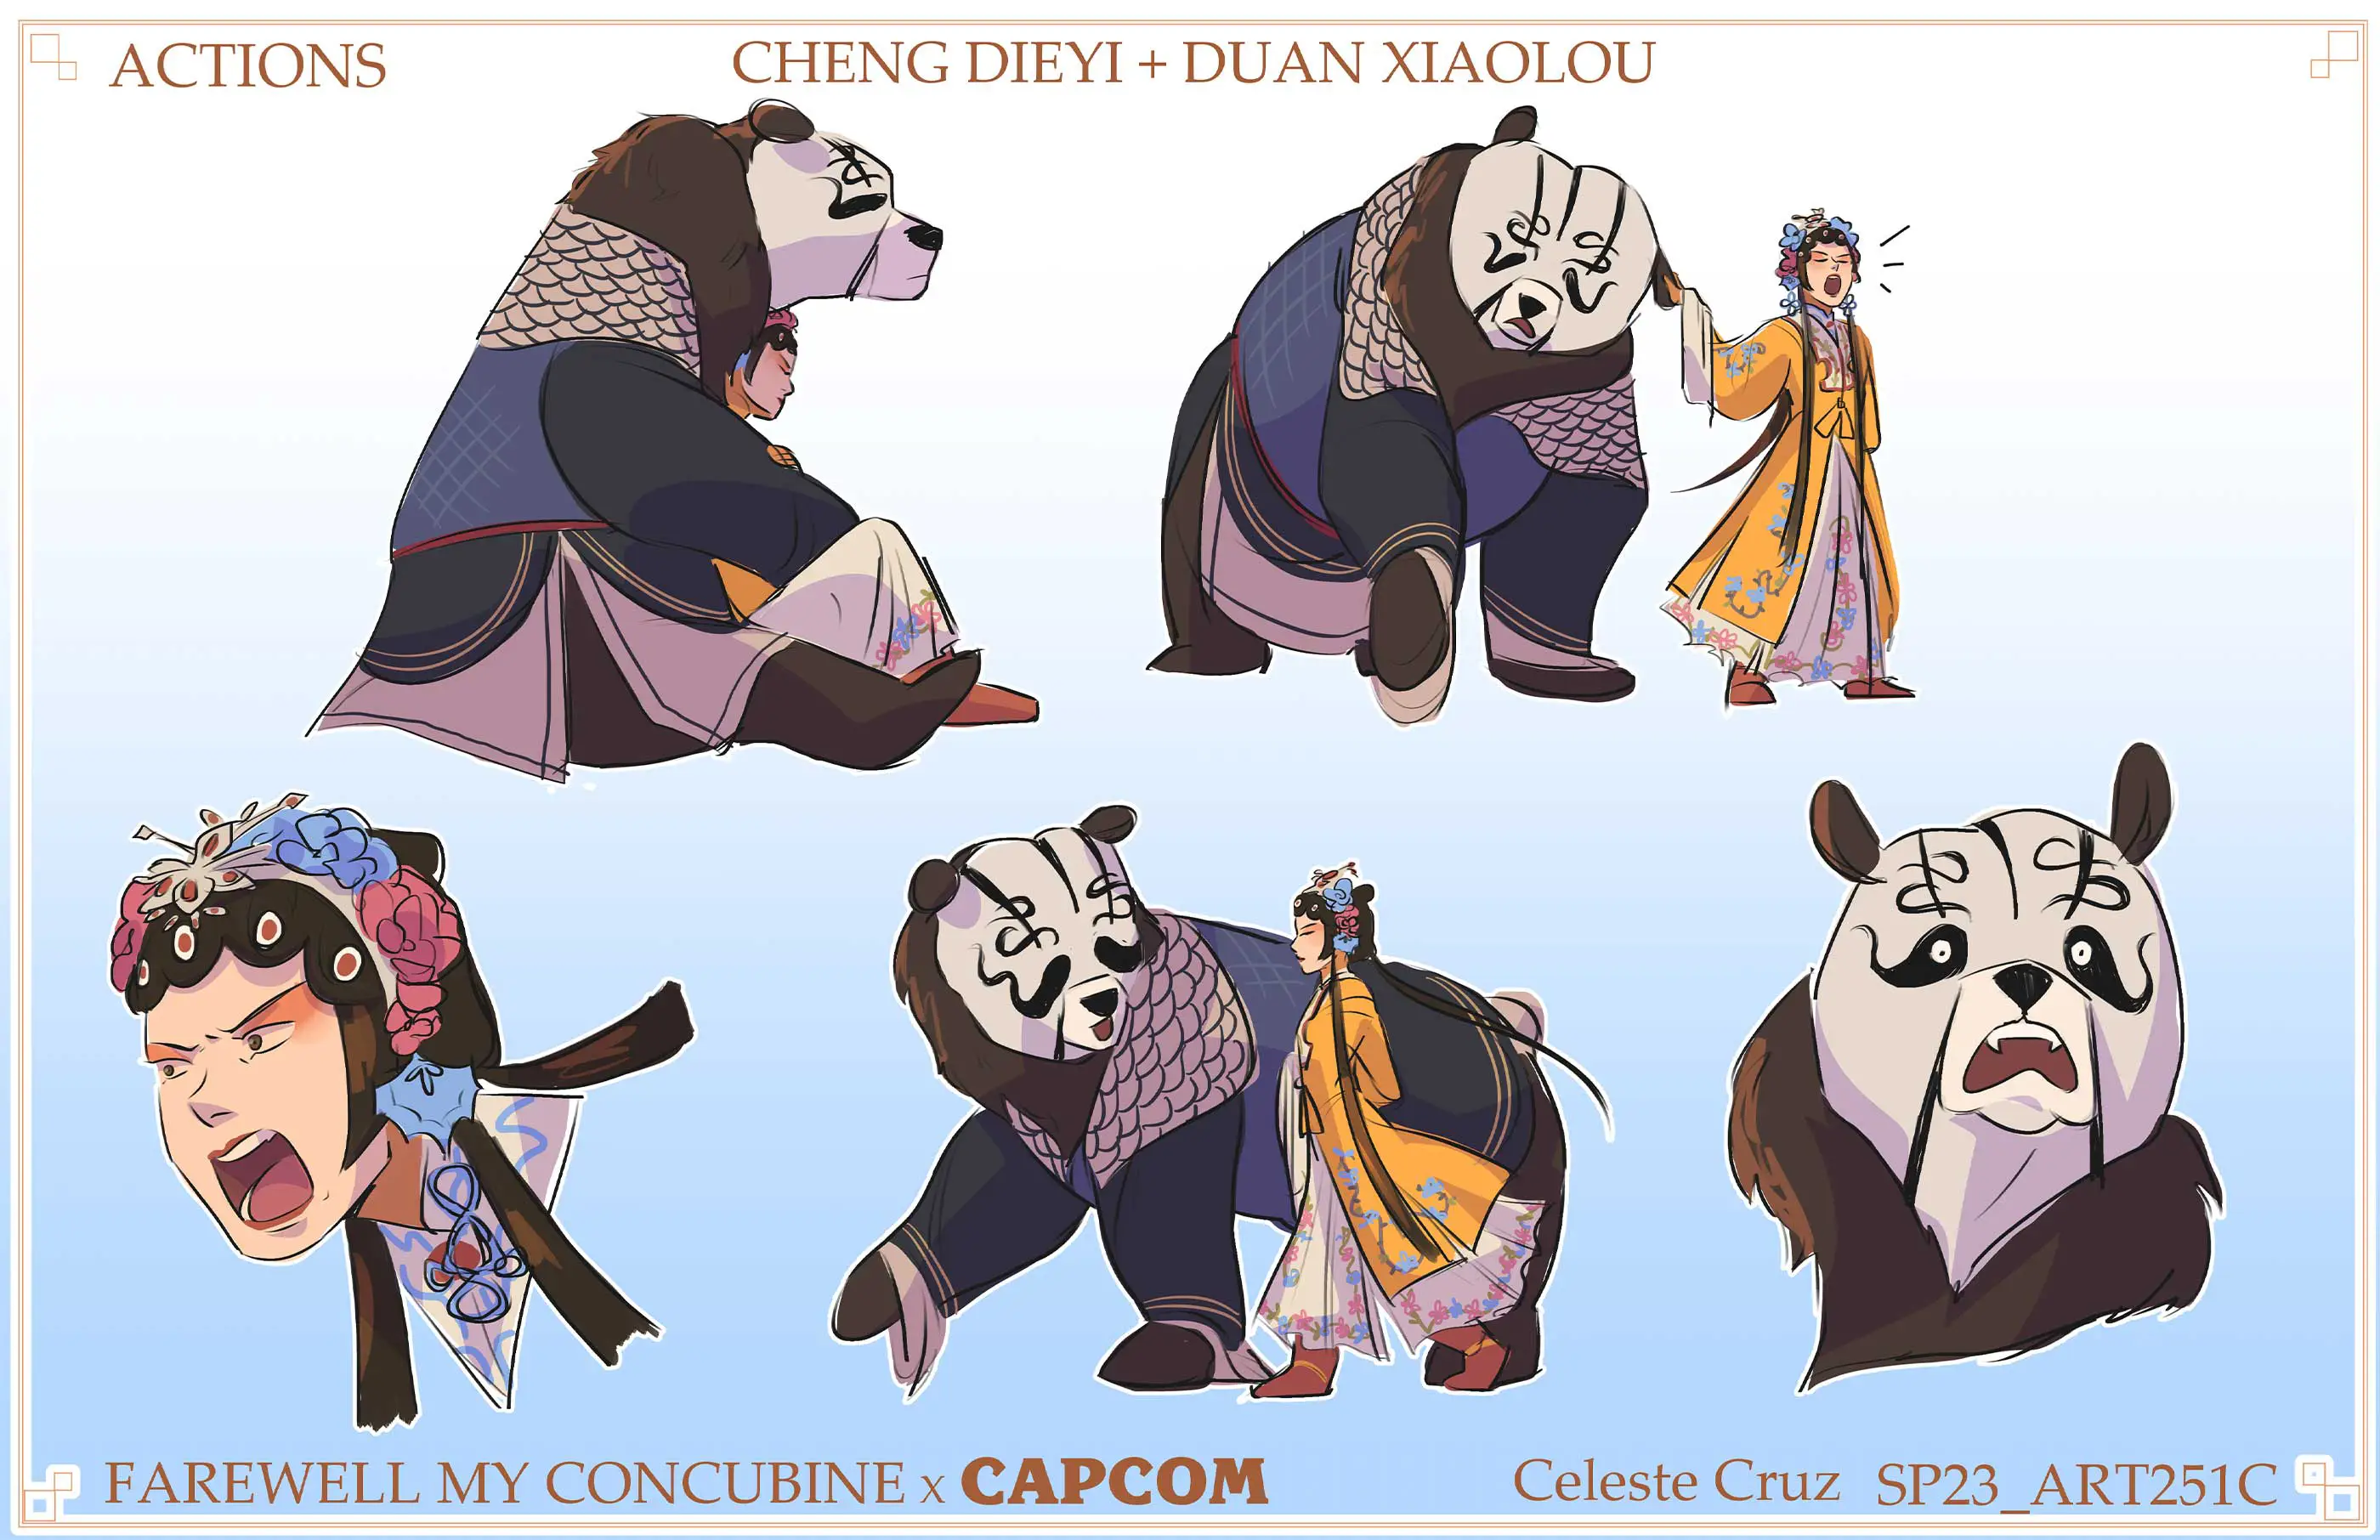 A collection of drawings of a panda and a person in fancy attire.